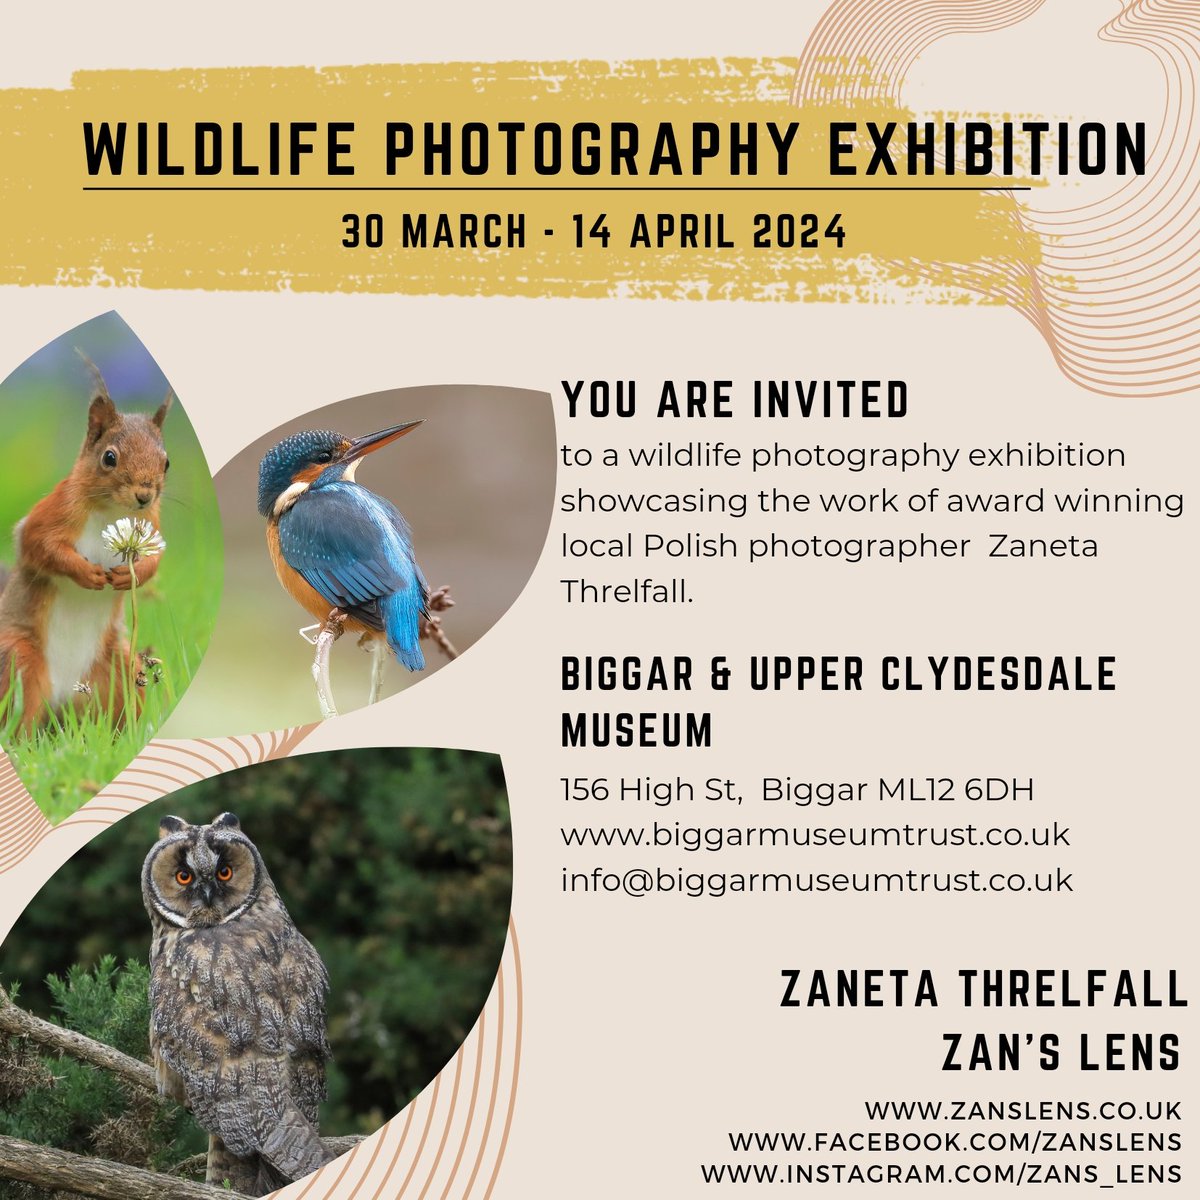 I would love to invite you all to my exhibition at Biggar Musum between the 30th of March and 14th of April. I've been preparing it for quite some time and I hope you will like the see results. Do pop in - and don't forget to check out what this wonderful museum has on display!